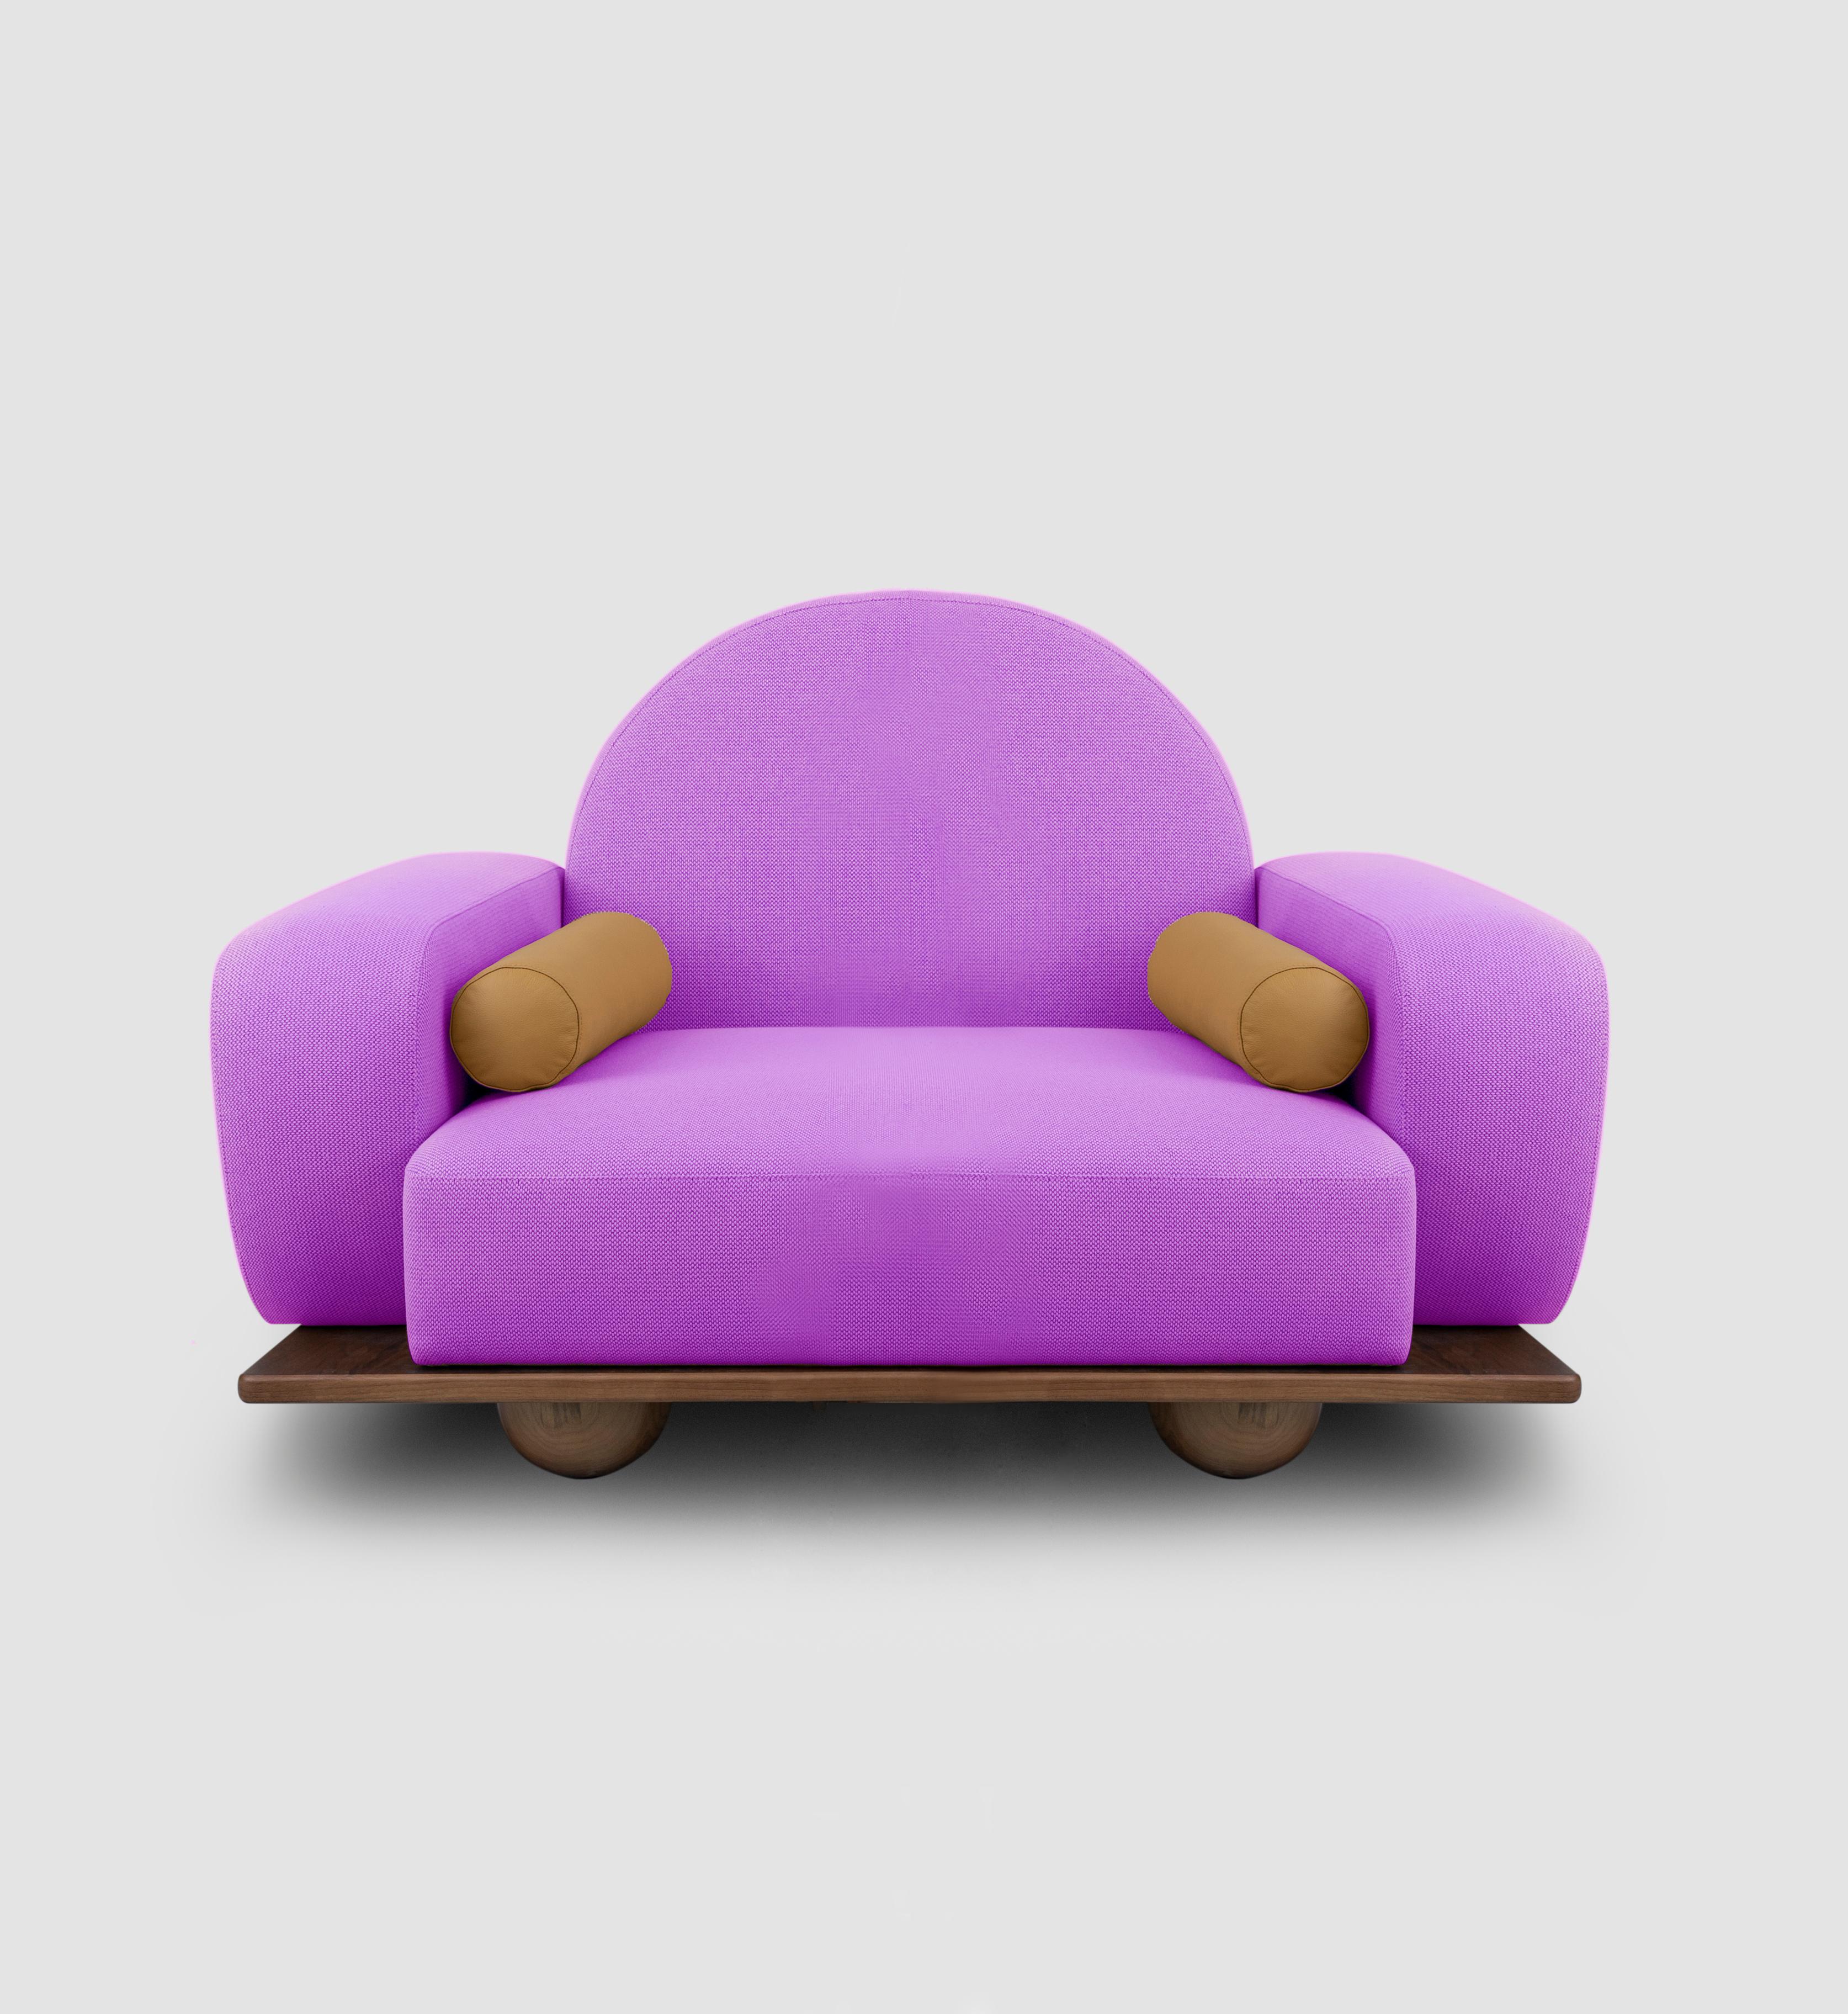 Beice armchair is designed to mimic the feeling of sitting on a cotton candy cloud. The combination of its color, arc shaped back rest, round edges and sphere walnut feet creates a dreamy, tender design. Beice is entirely handcrafted and